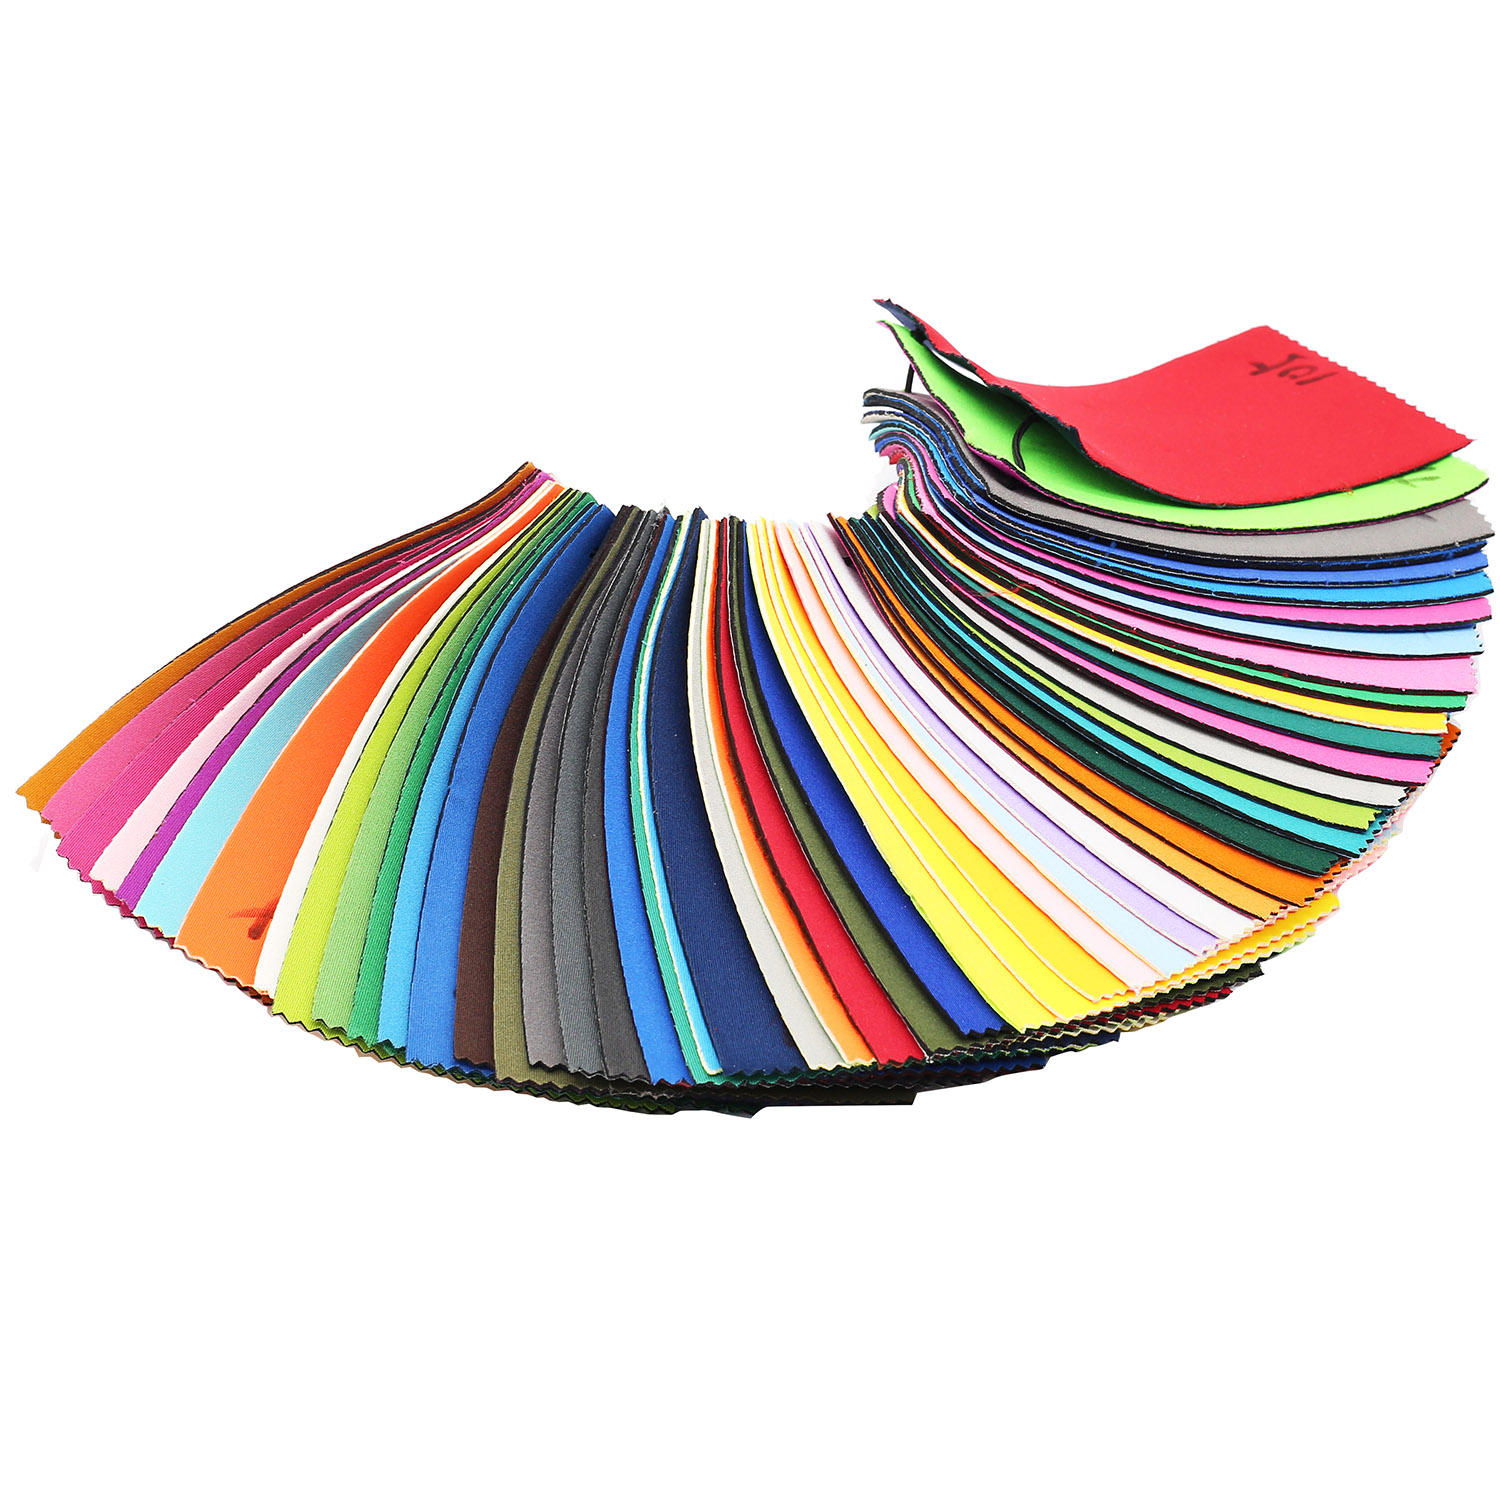 Neoprene with Nylon fabric for surfing suits